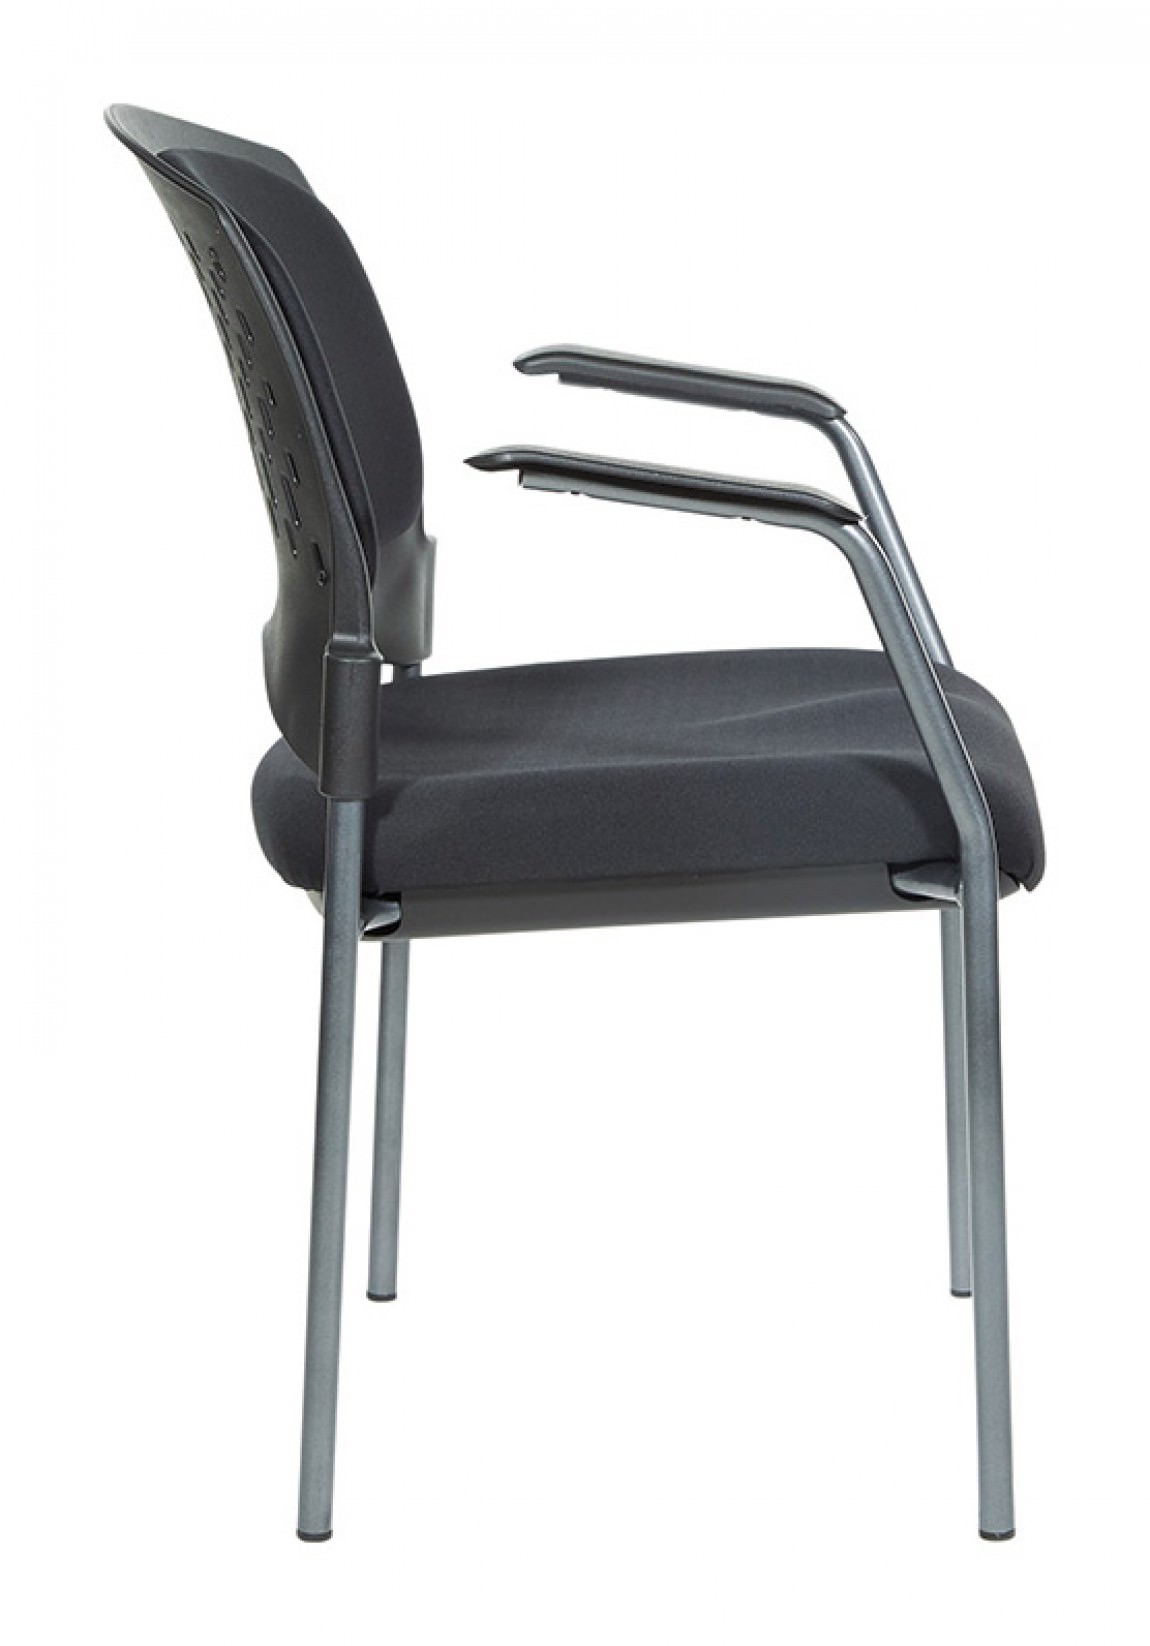 Black Office Guest Chair with Arms | Pro Line II by Office Star Products